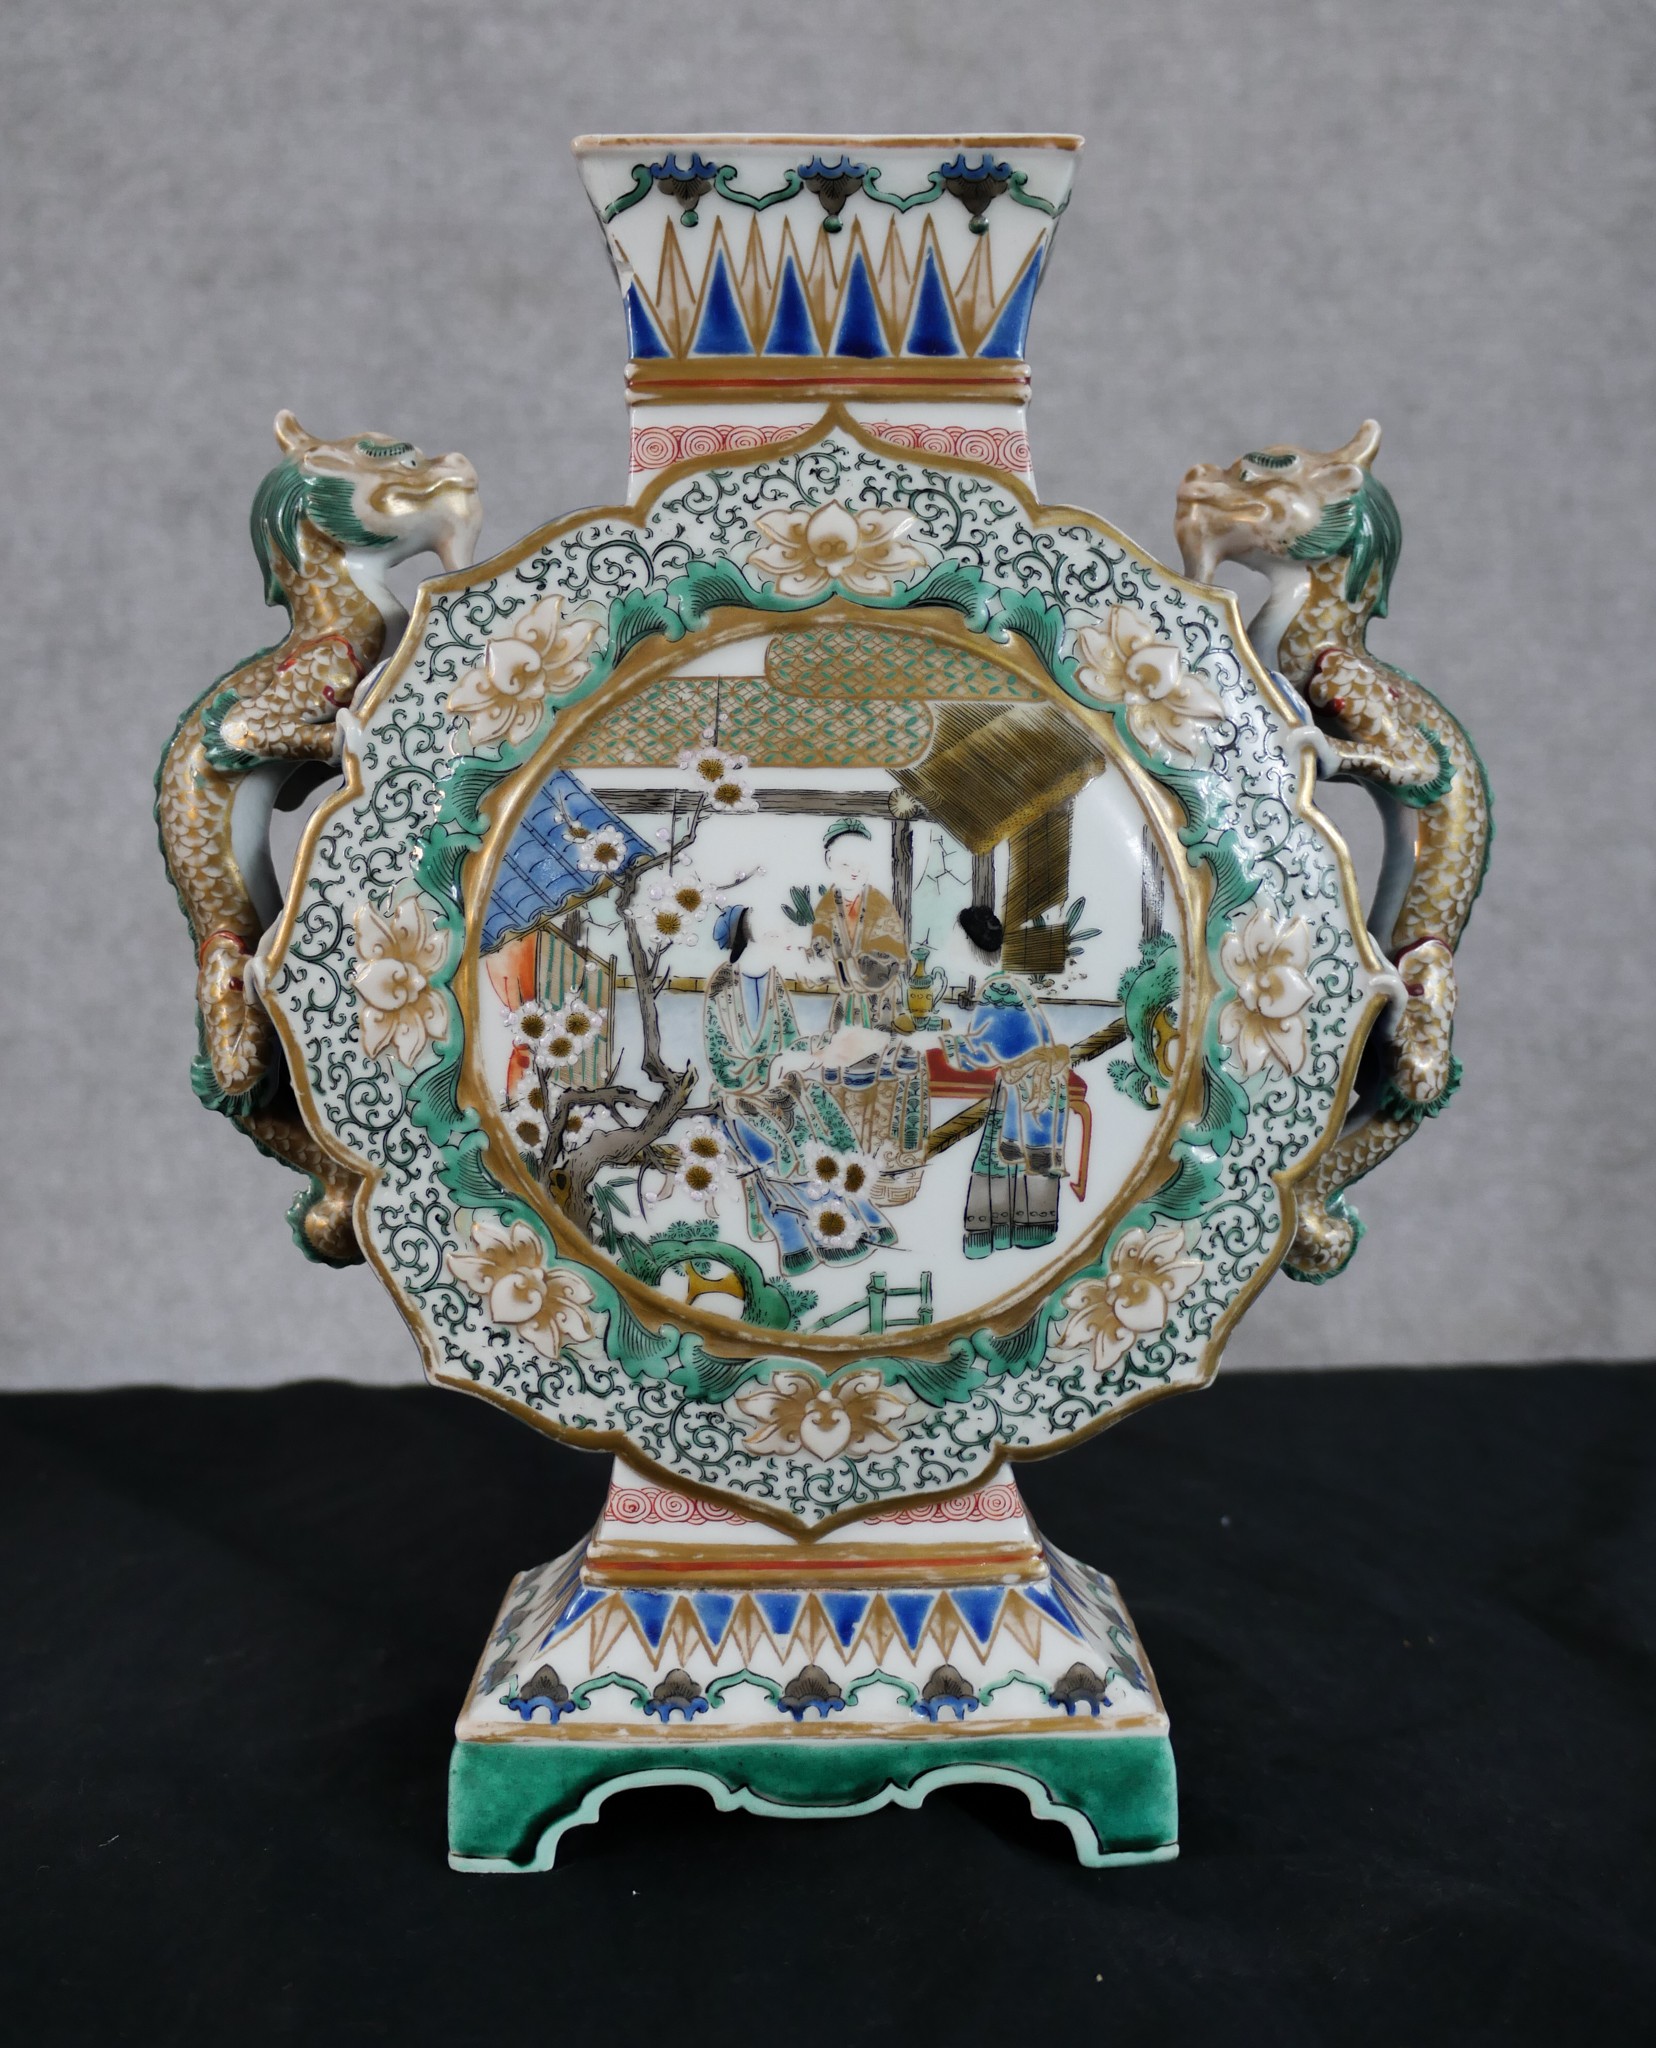 A decorative Chinese vase depicting a rural scene and two dragons as handles. With the artist's seal